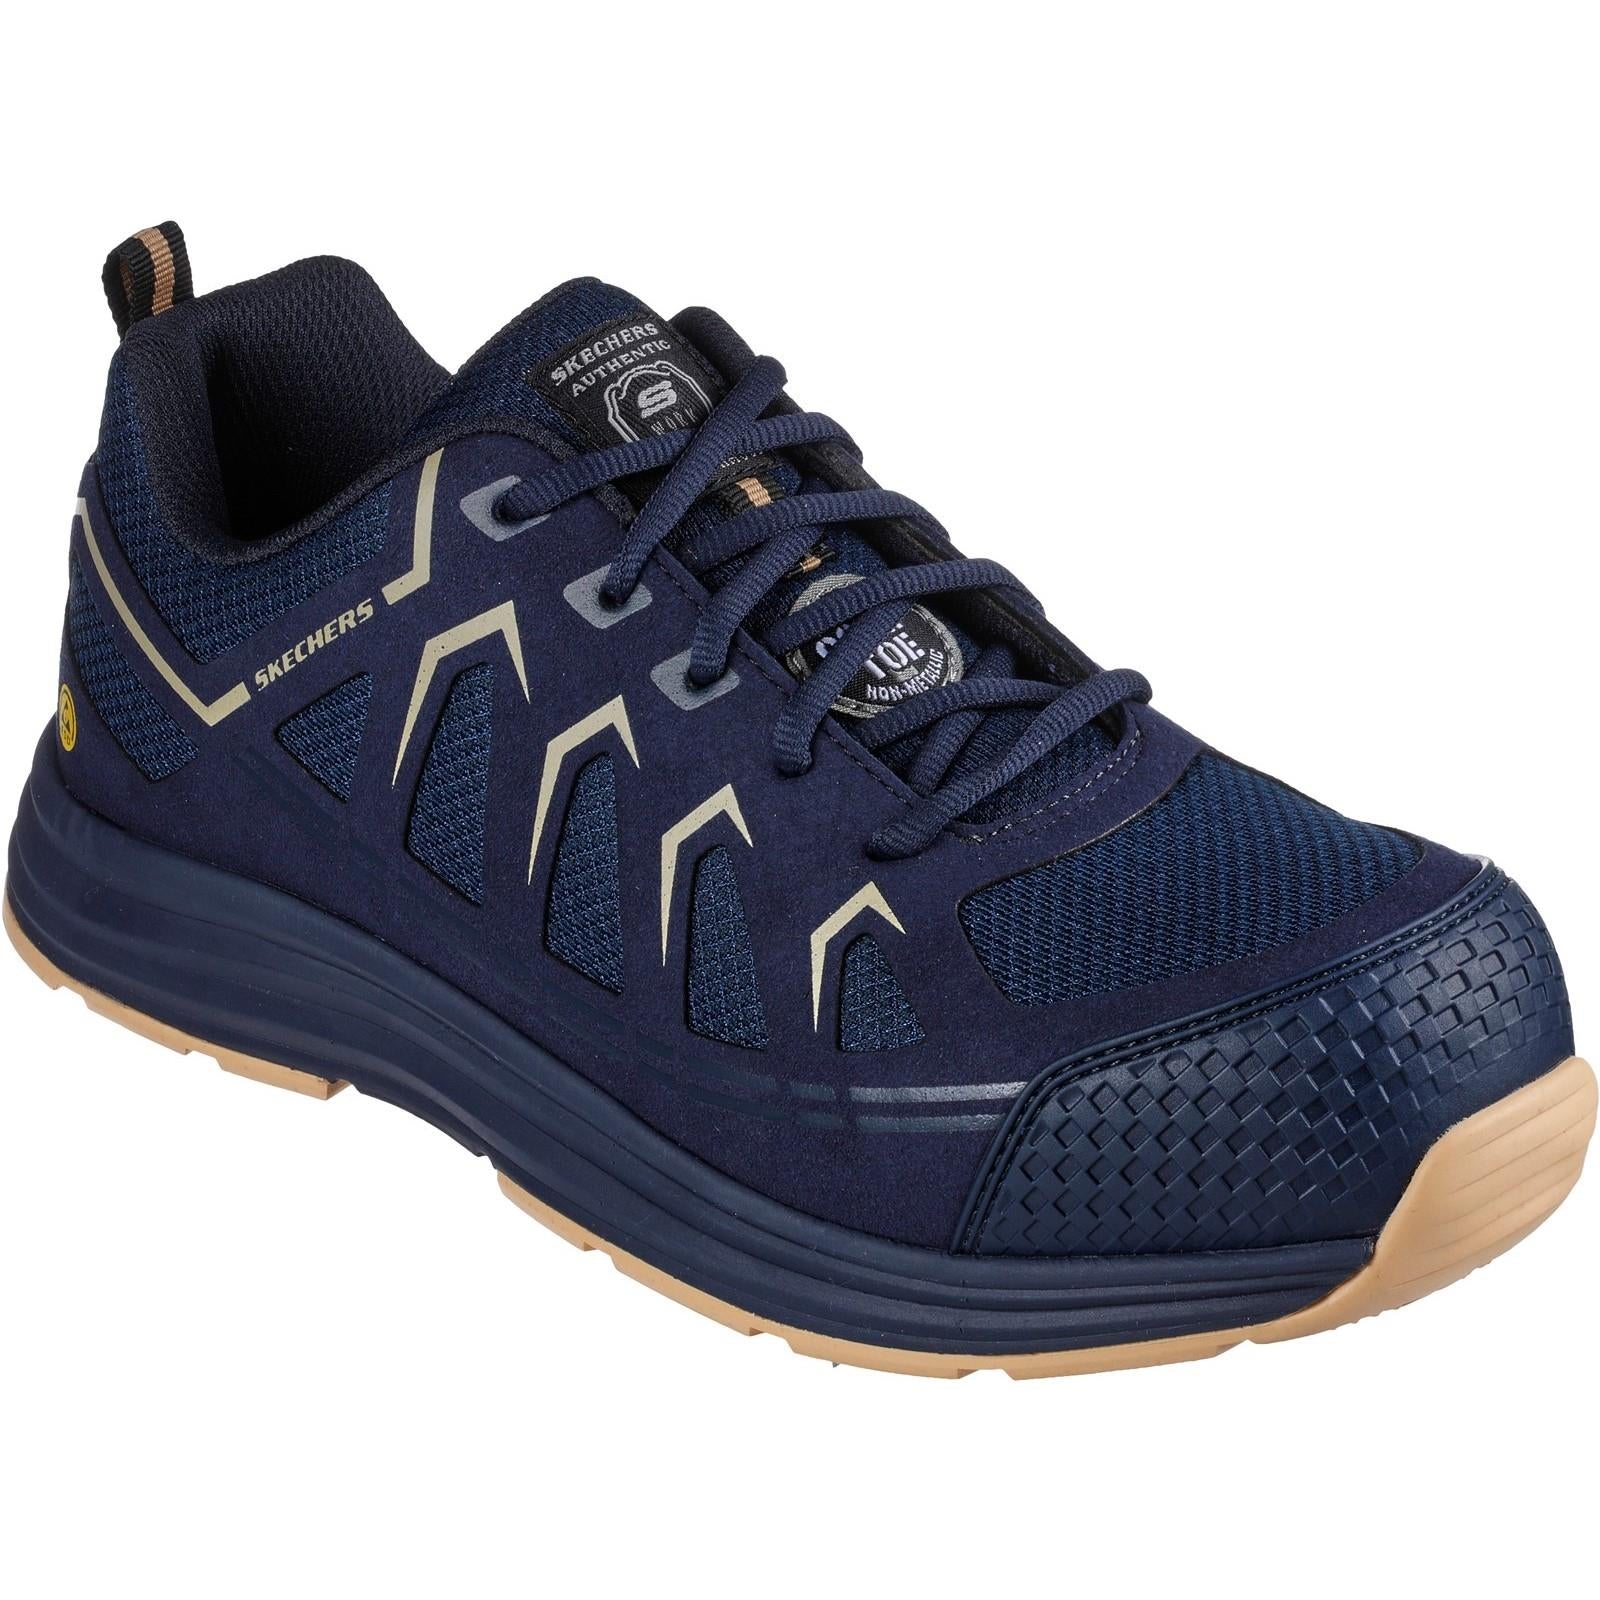 Skechers Malad II S1P navy/tan composite toe/midsole work safety trainers shoes